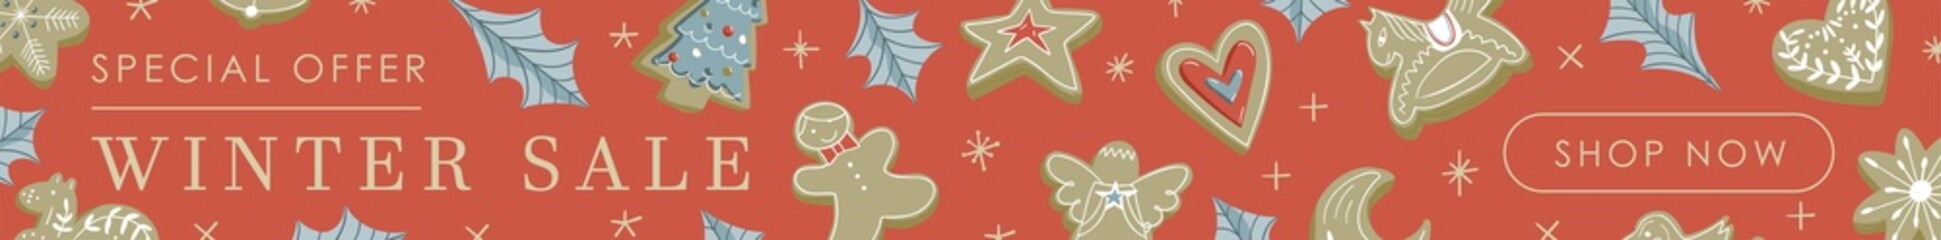 Web banner cute design illustration with red background, beige sparkles stars, cookies, holly leaves with Special offer Winter sale Shop now button sign - 474186609